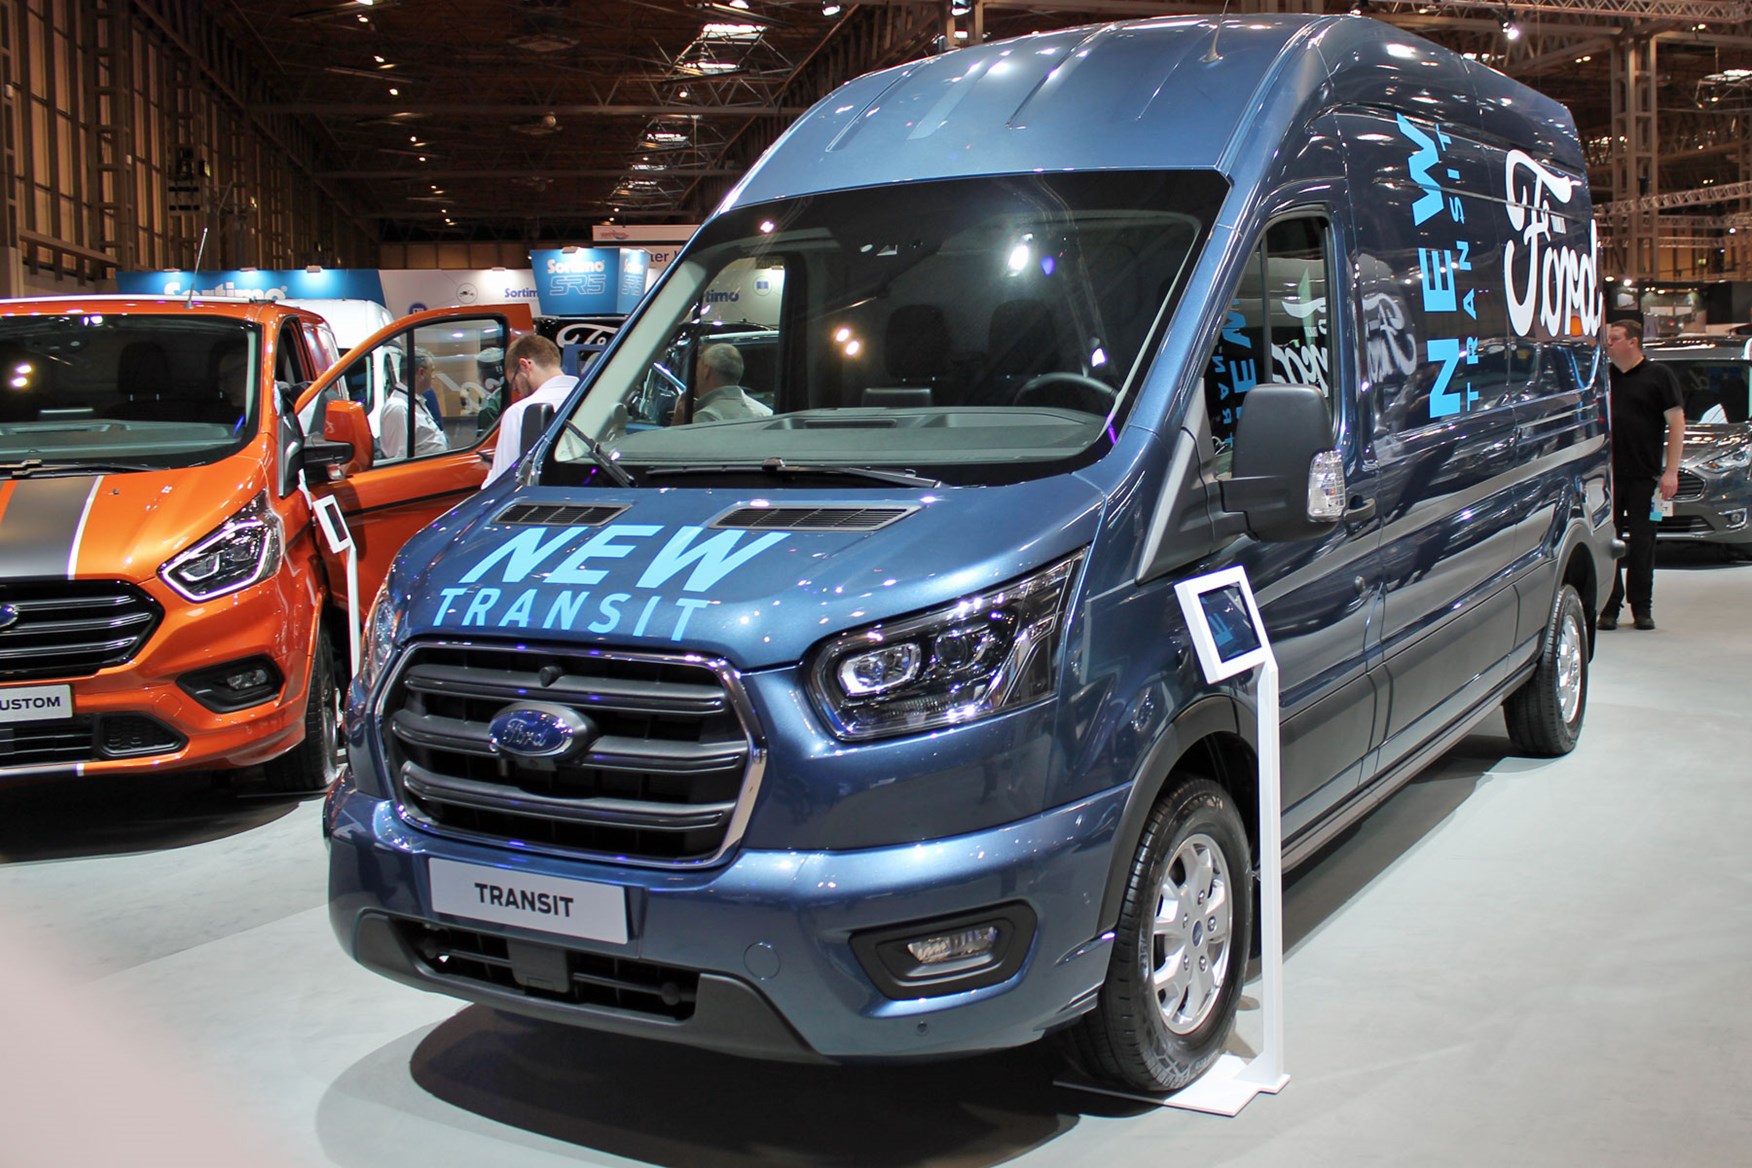 New 2019 Ford Transit Facelift Latest Details From The Cv